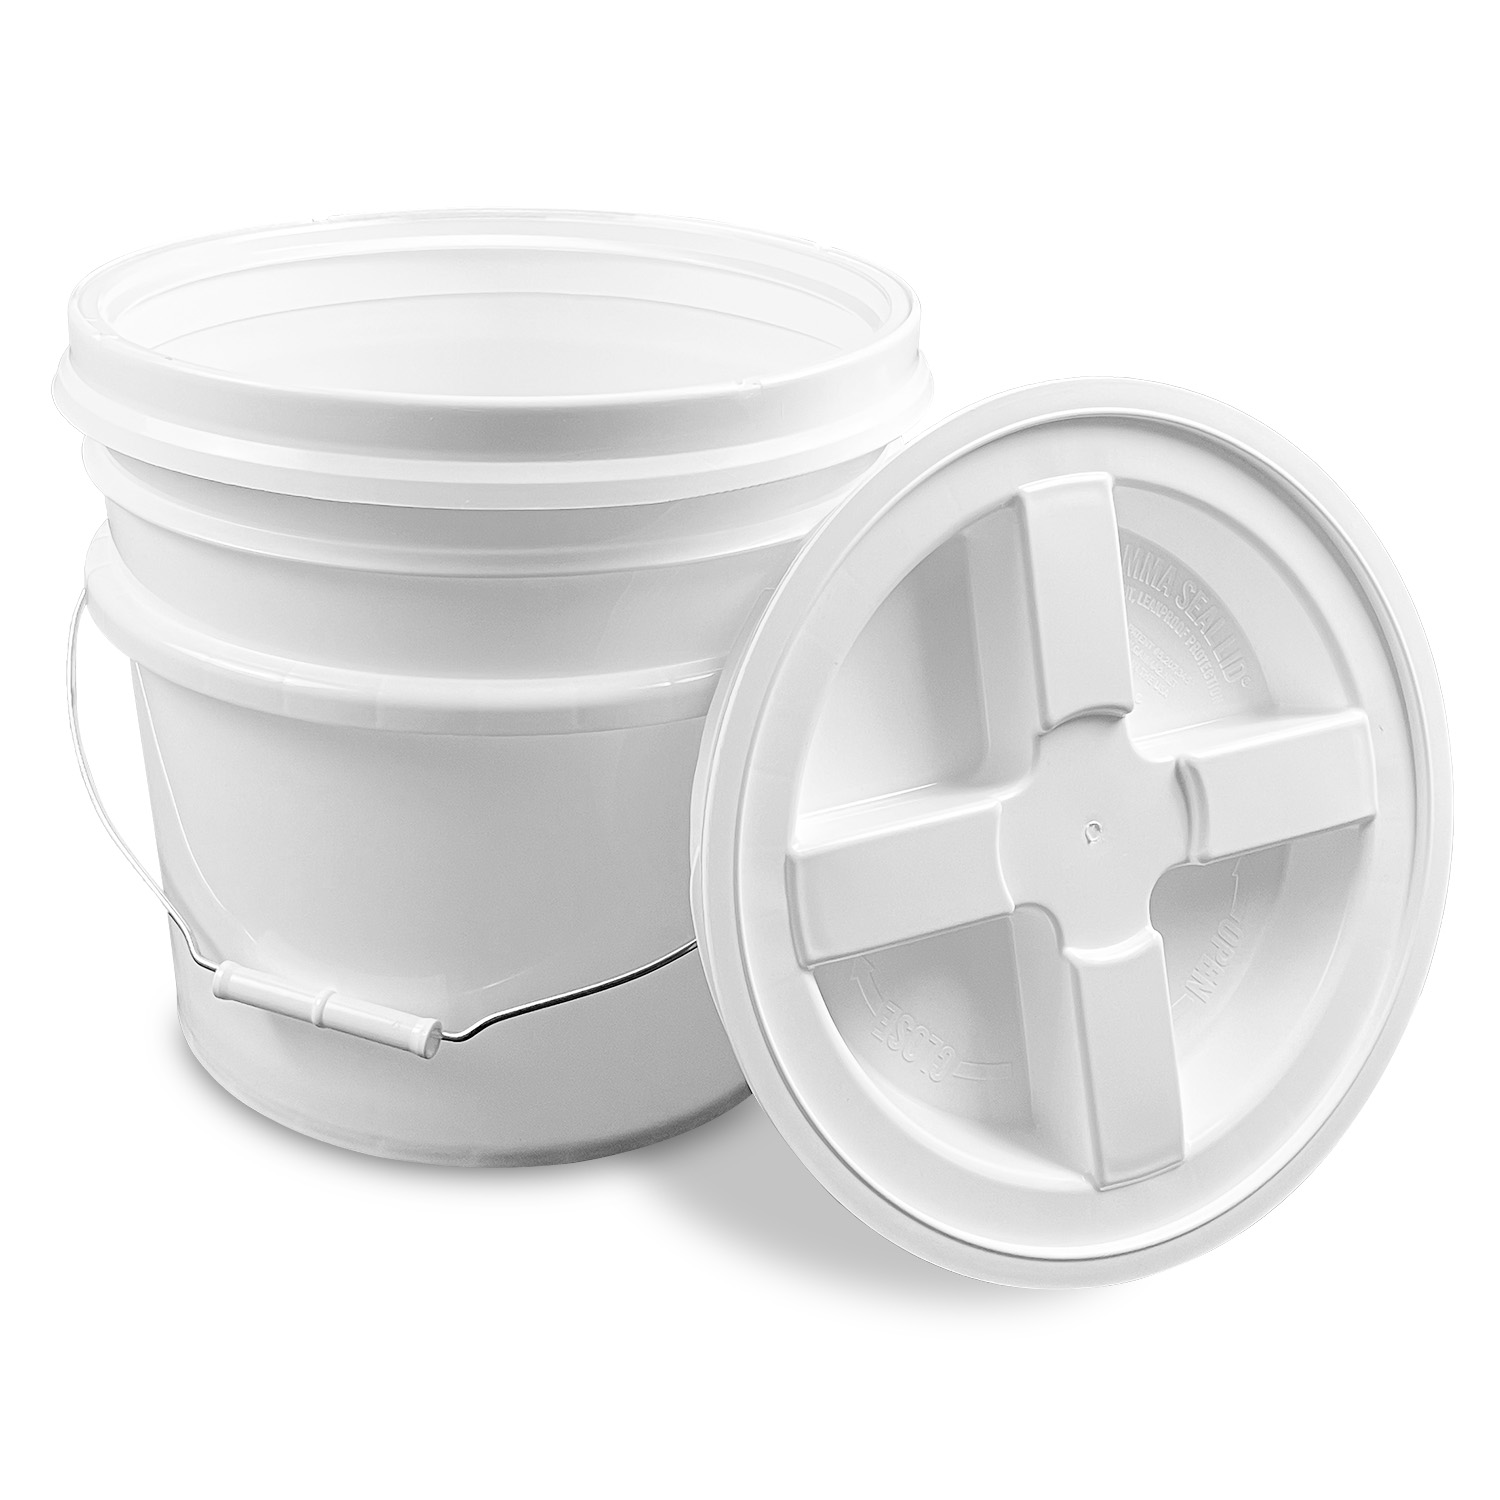 Lid with Spout for 3.5, 5, 6 and 7 Gallon Plastic Pail - White